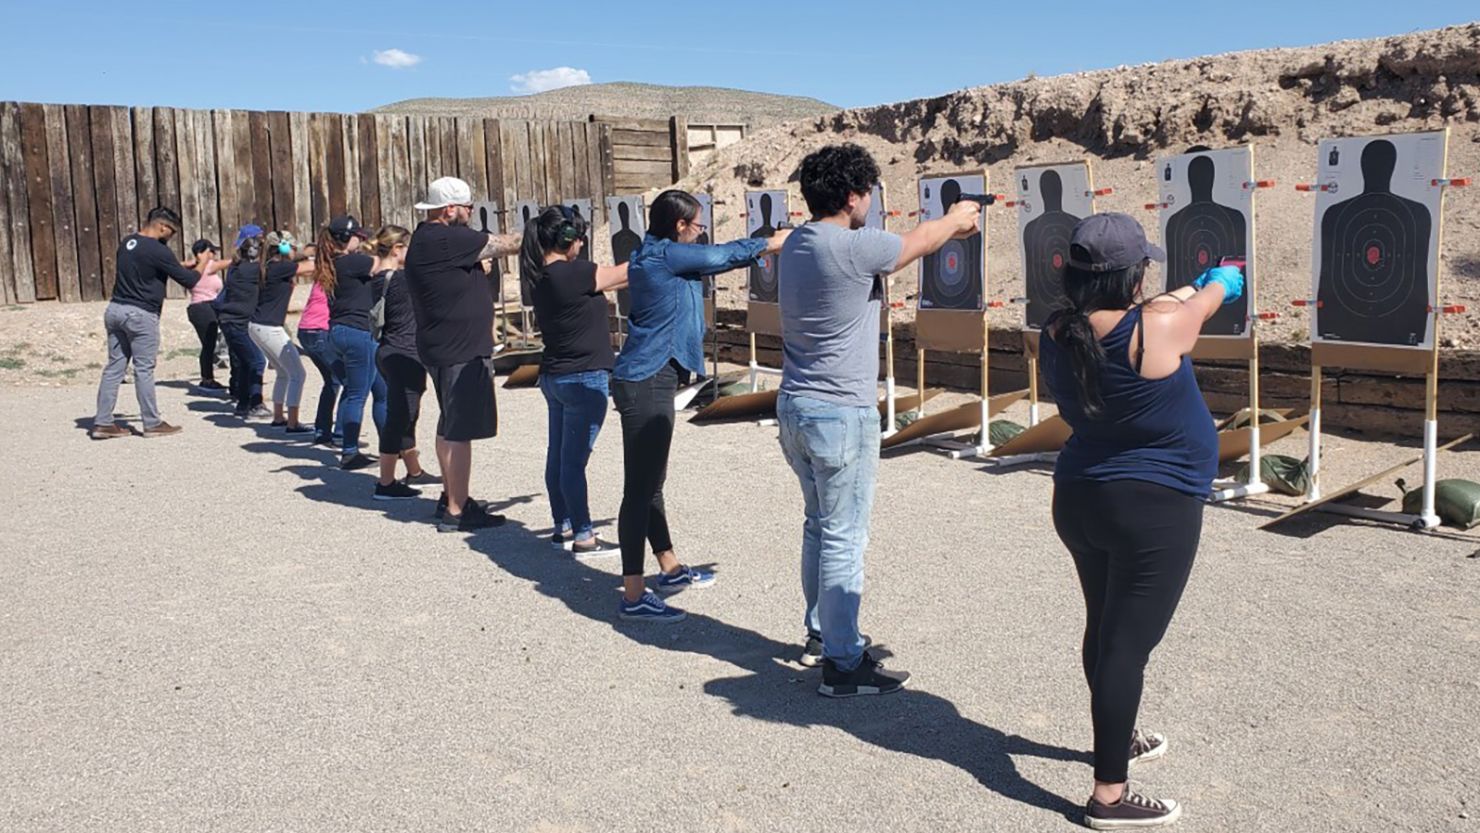 A firearm safety instructor in El Paso, Texas says more people were interested in getting licenses to carry guns in the months after last year's mass shooting at a Walmart store.